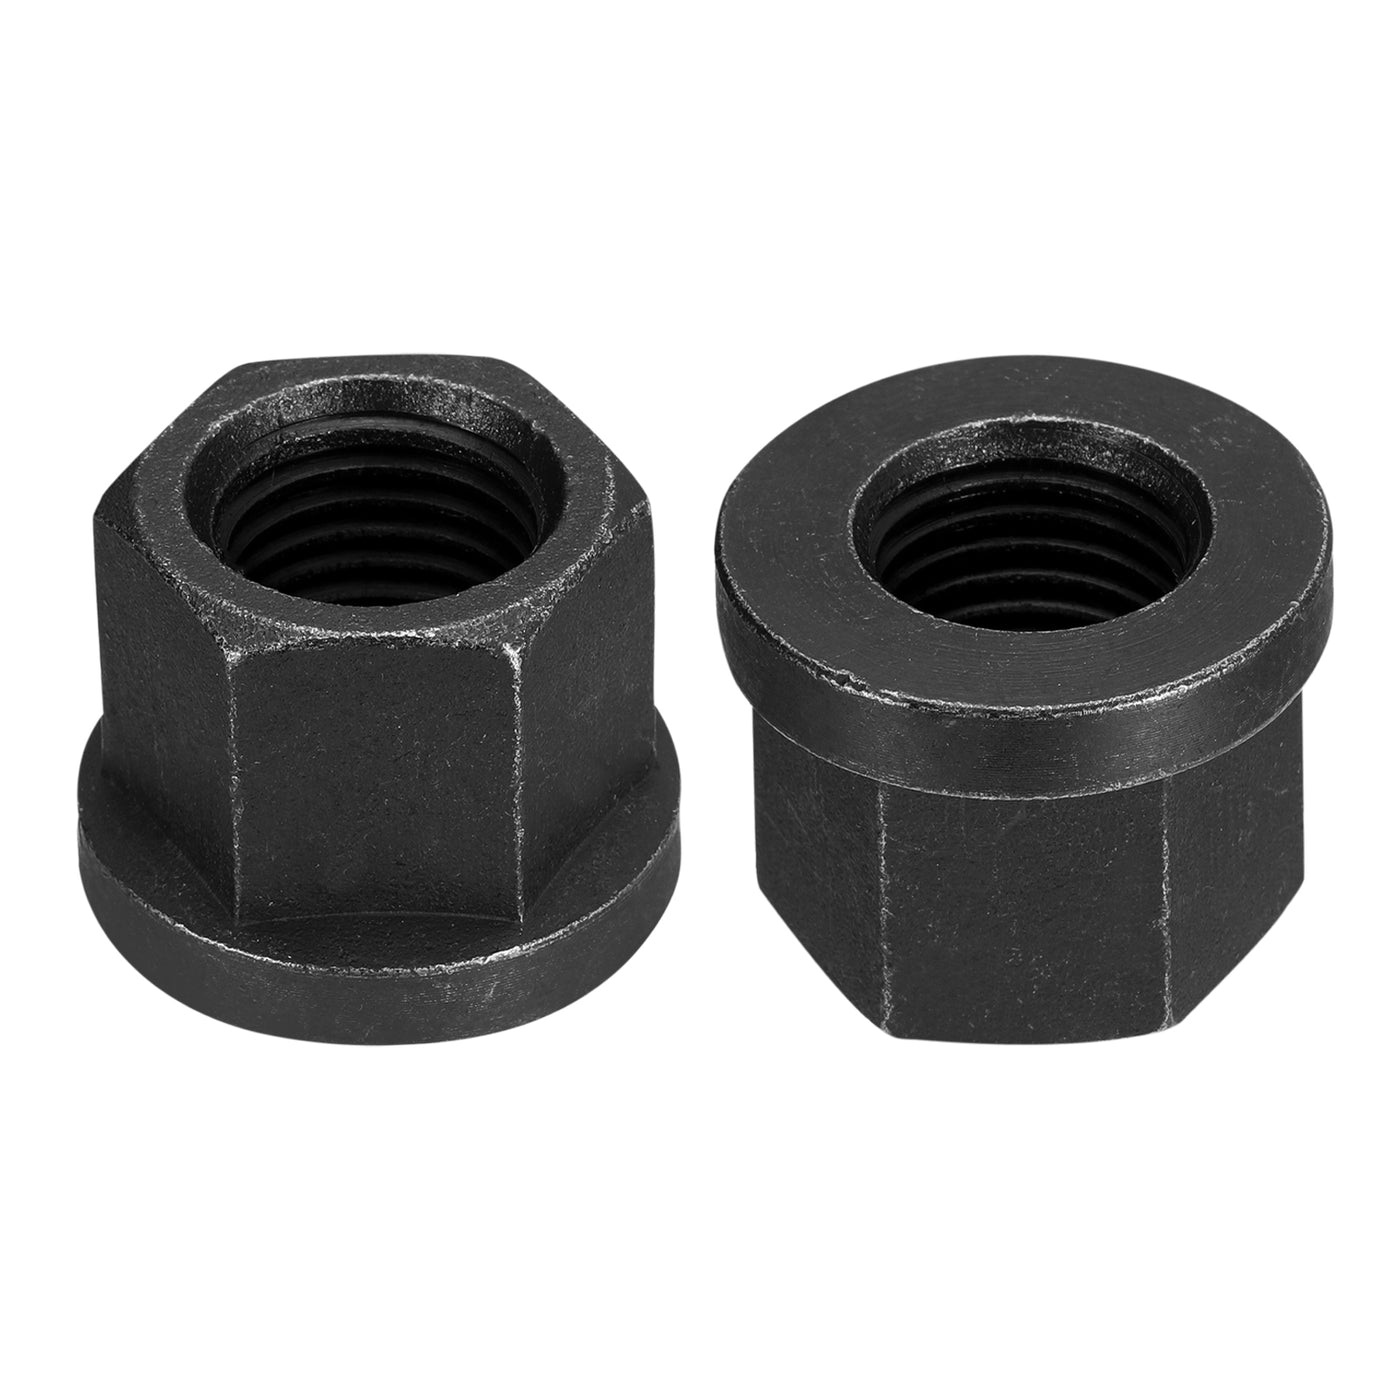 uxcell Uxcell M22 Flange Hex Lock Nuts, 2pcs Grade 8.8 Carbon Steel Hex Flange Nuts